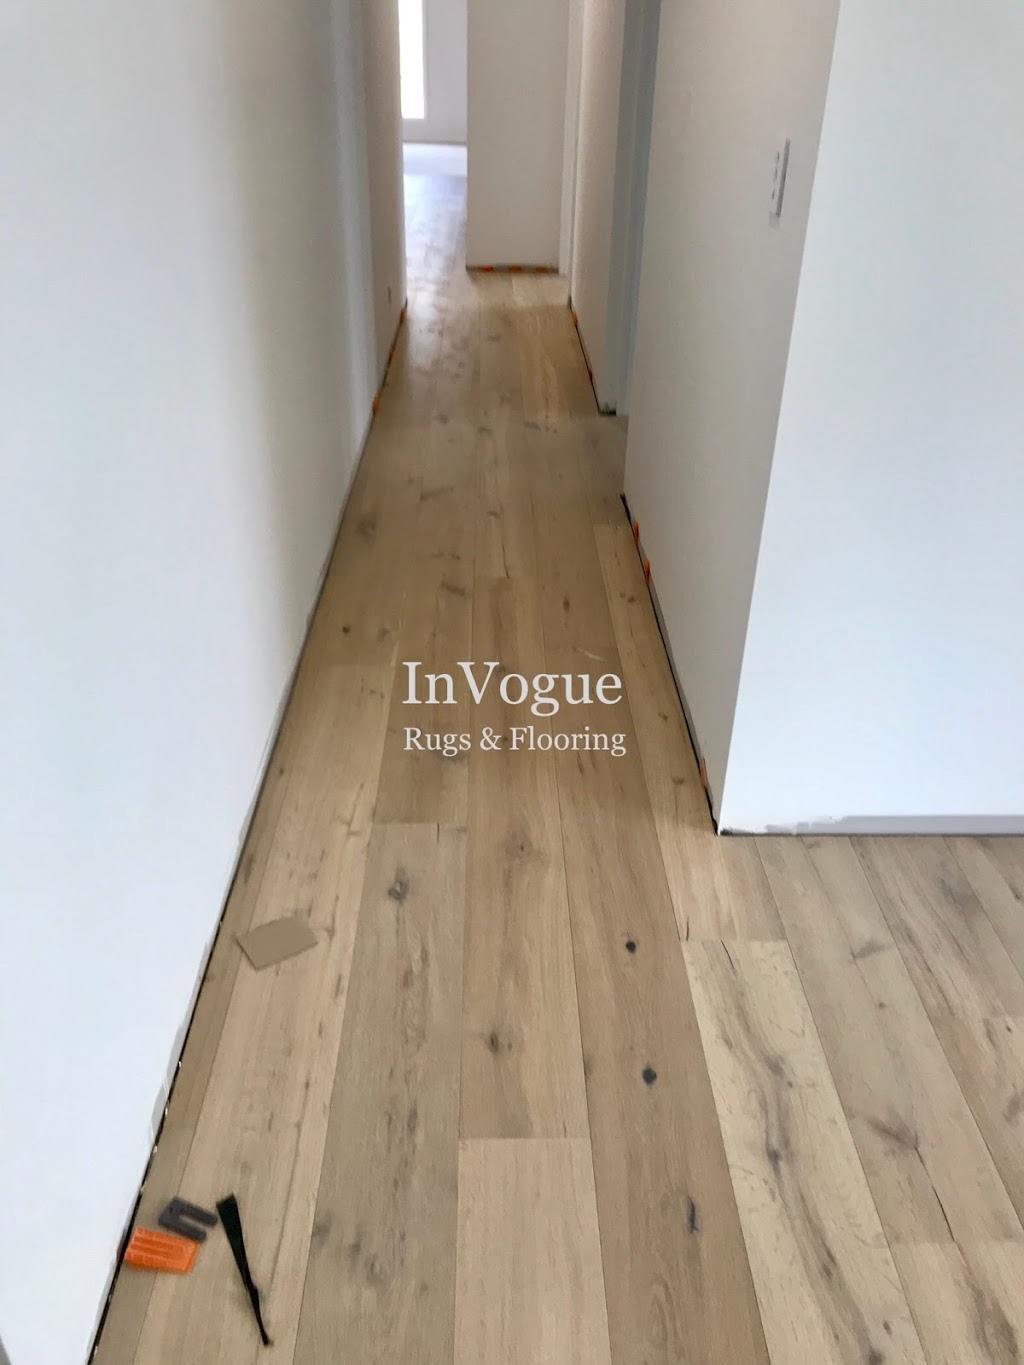 InVogue Rugs & Flooring | home goods store | Shop 5, Casula Central, 633 Hume Hwy, Casula NSW 2170, Australia | 0287408364 OR +61 2 8740 8364